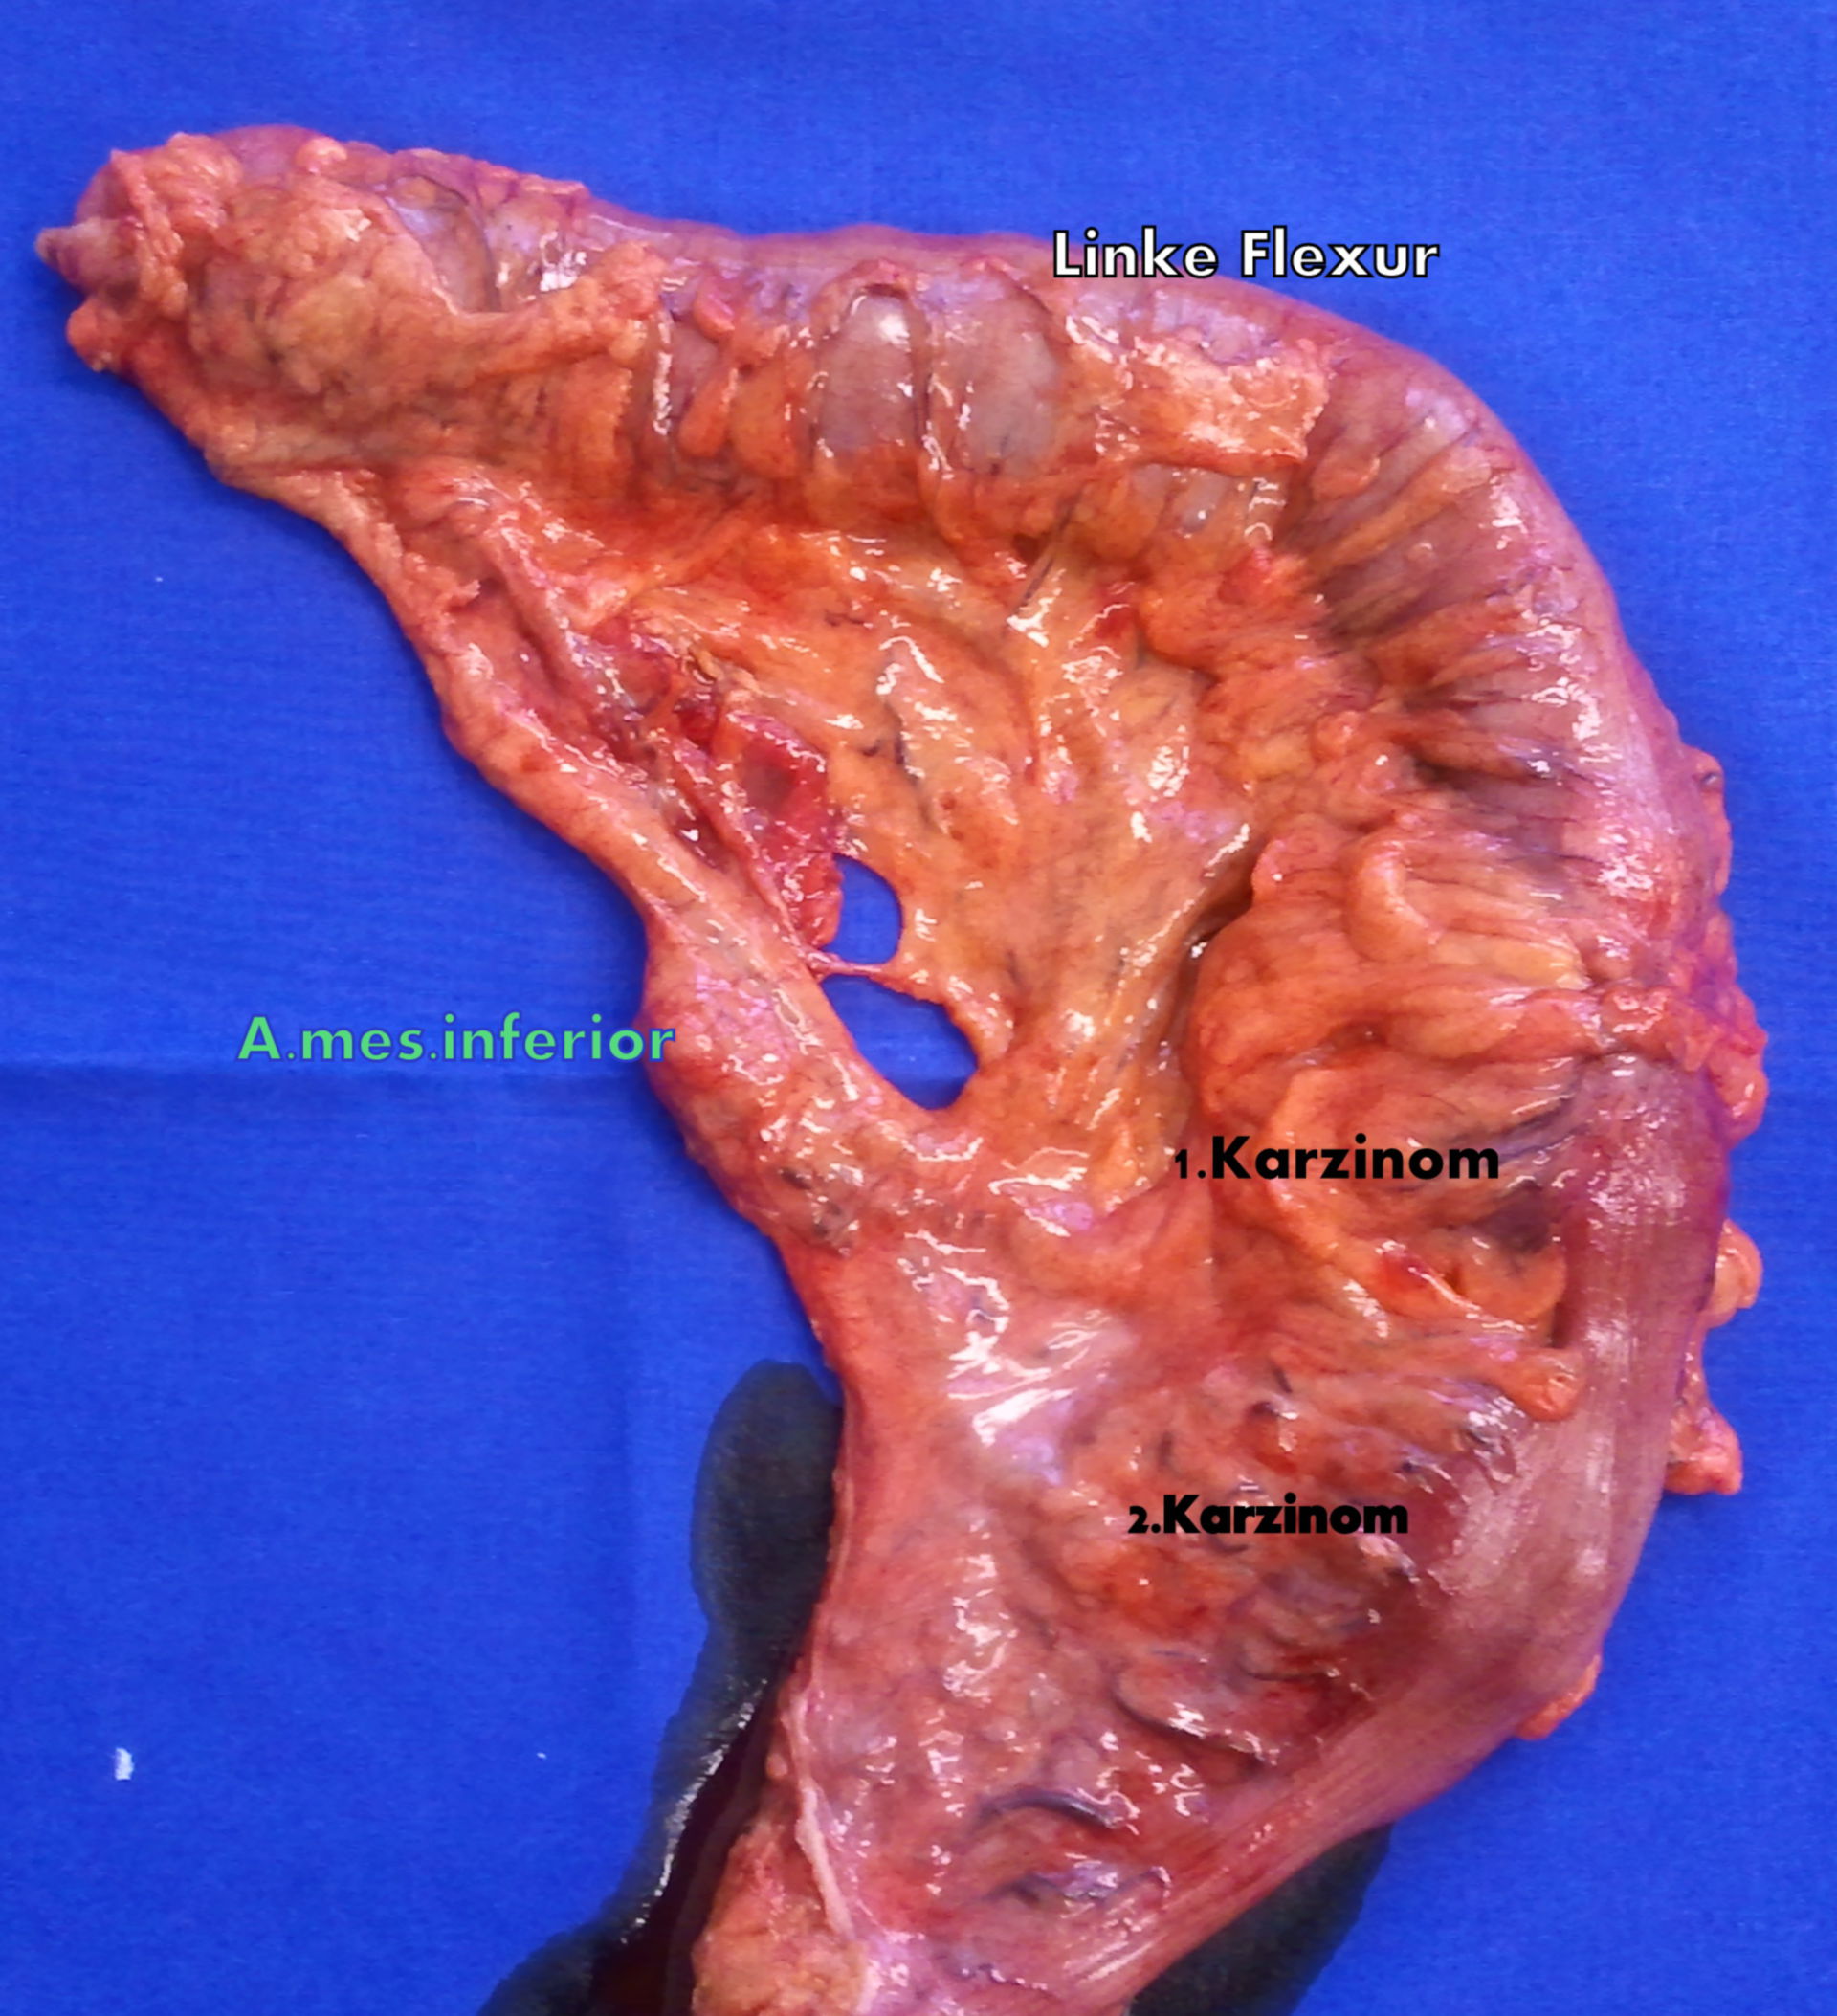 Two synchronous cancers of the sigmoid colon - specimen not sliced